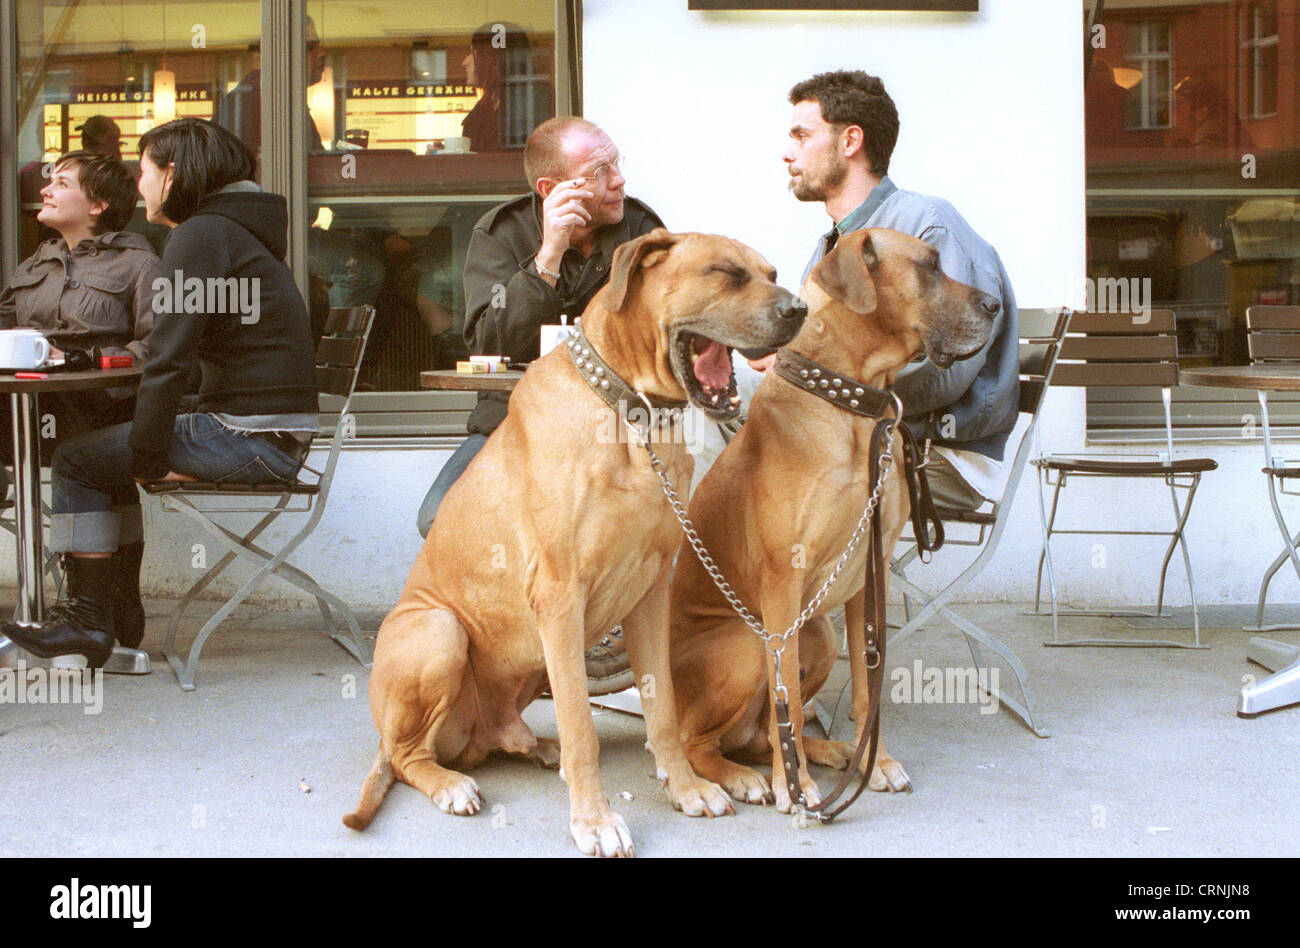 Two very large dogs from street cafe, Berlin Stock Photo